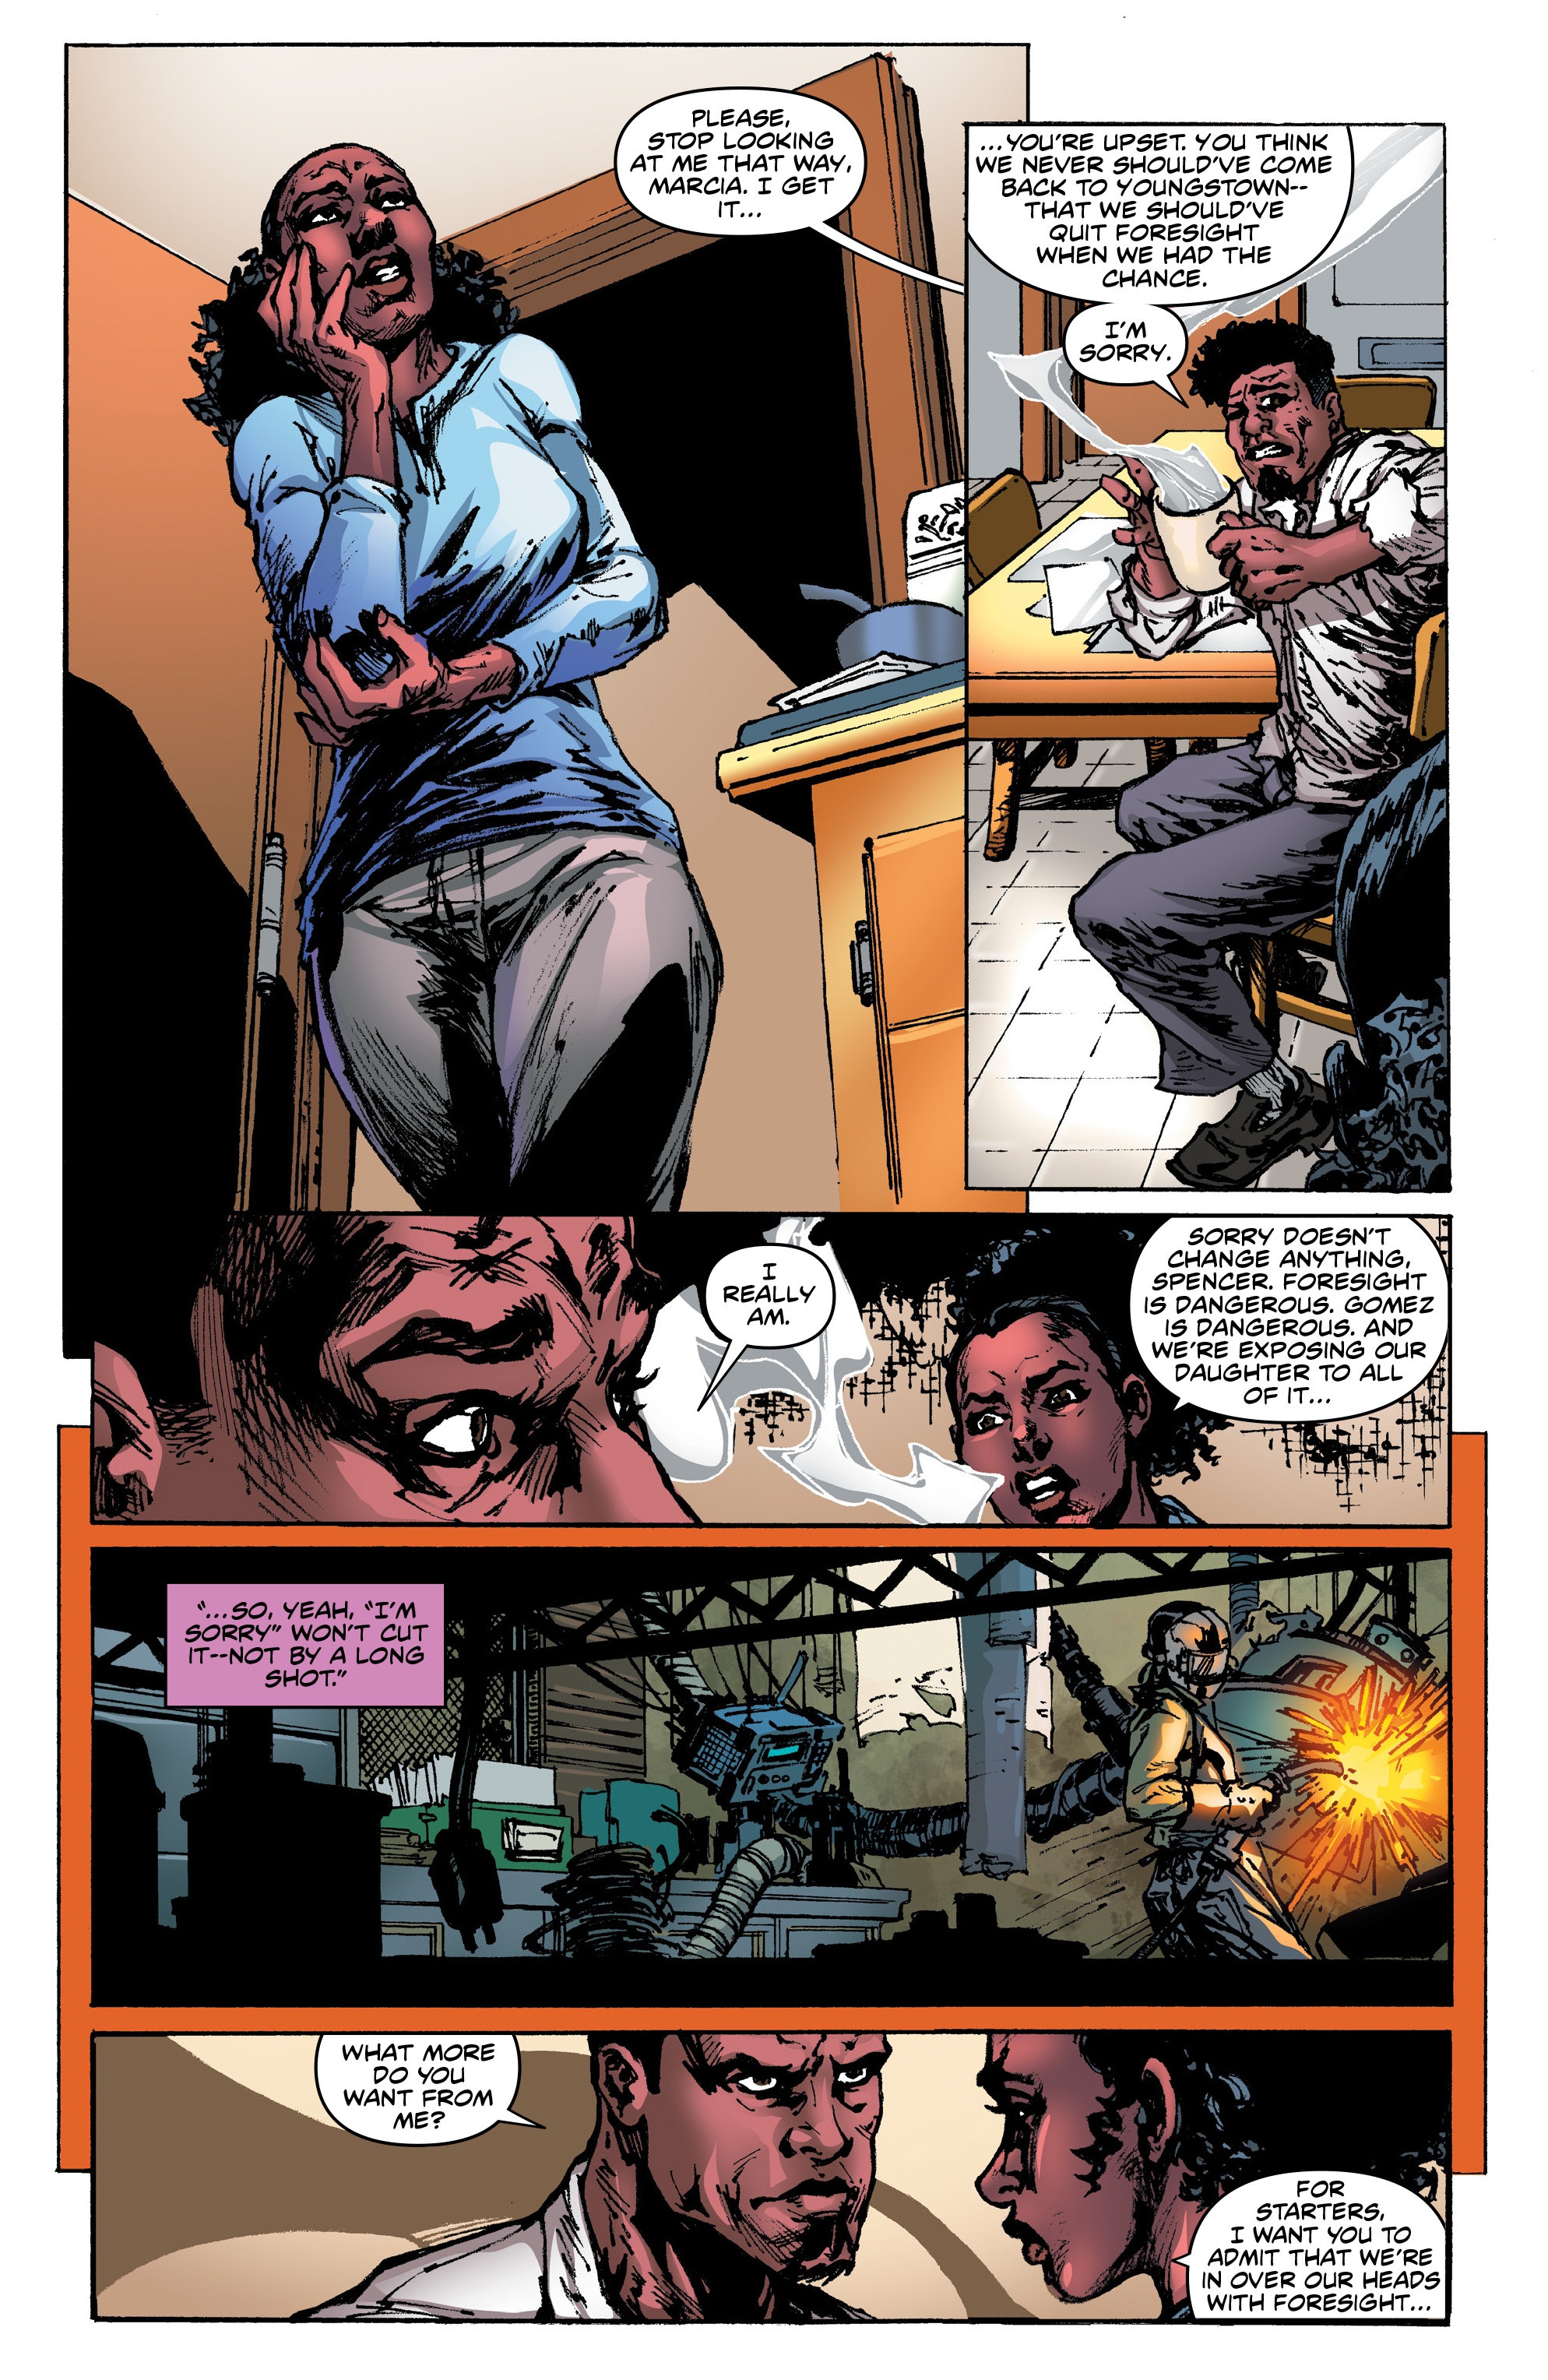 Catalyst Prime Superb (2017): Chapter 4 - Page 3